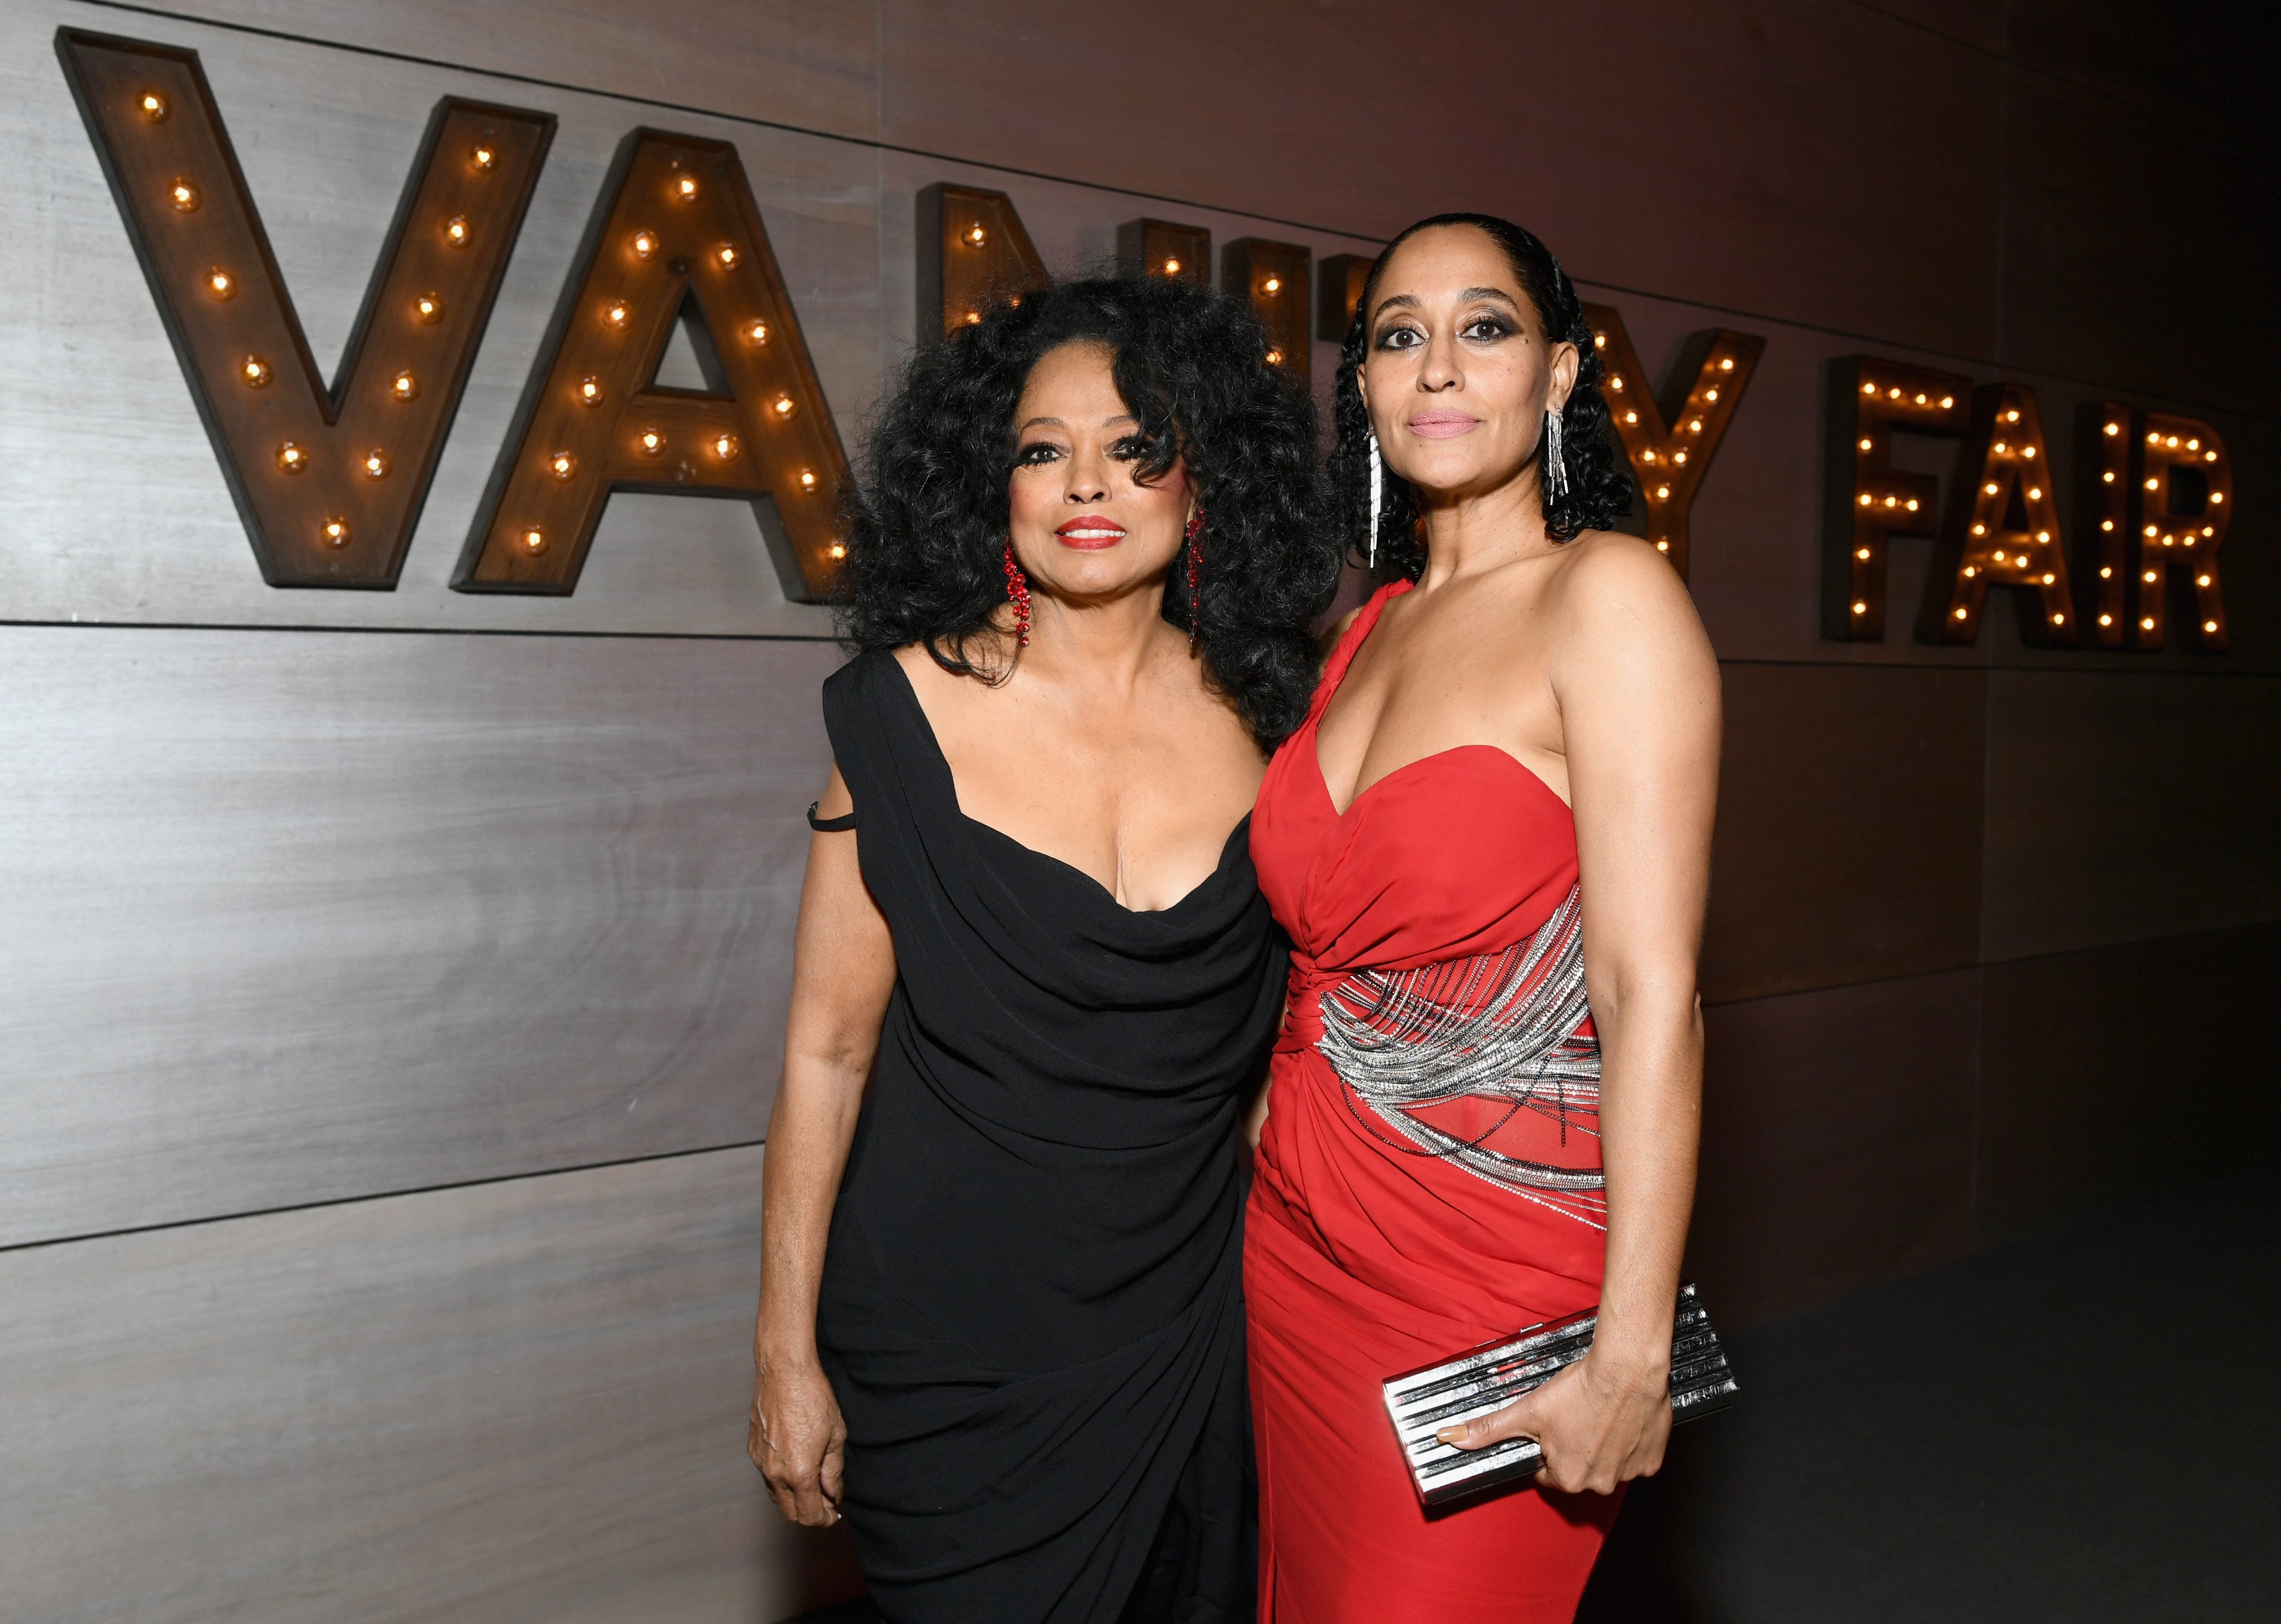 Diana Ross and Emmy nominee Tracee Ellis Ross embracing each other at the 2019 Vanity Fair party.